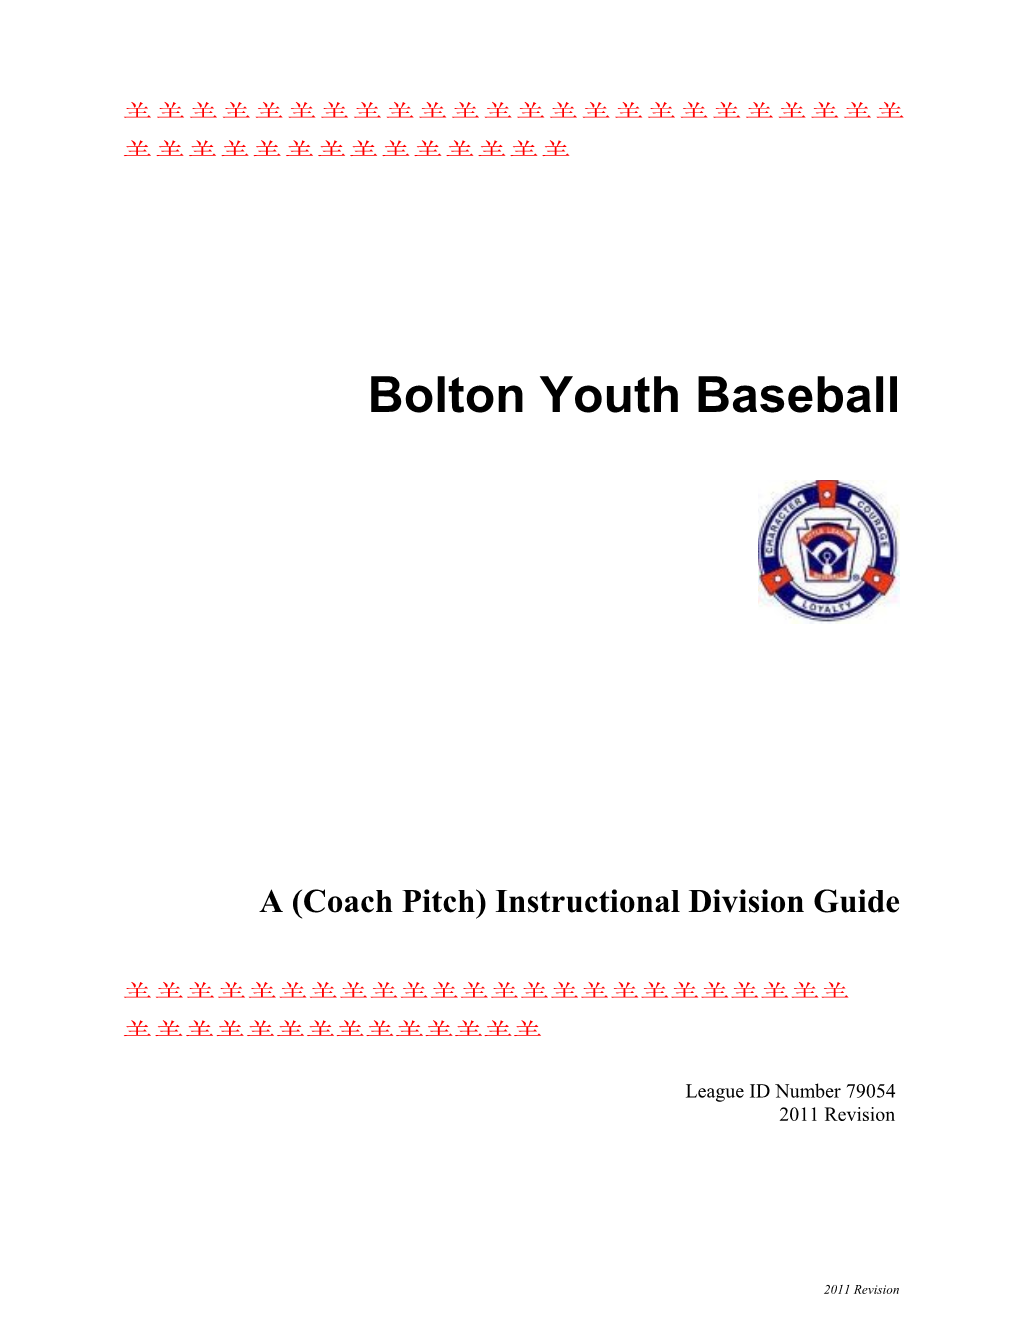 A (Coach Pitch) Instructional Division Guide